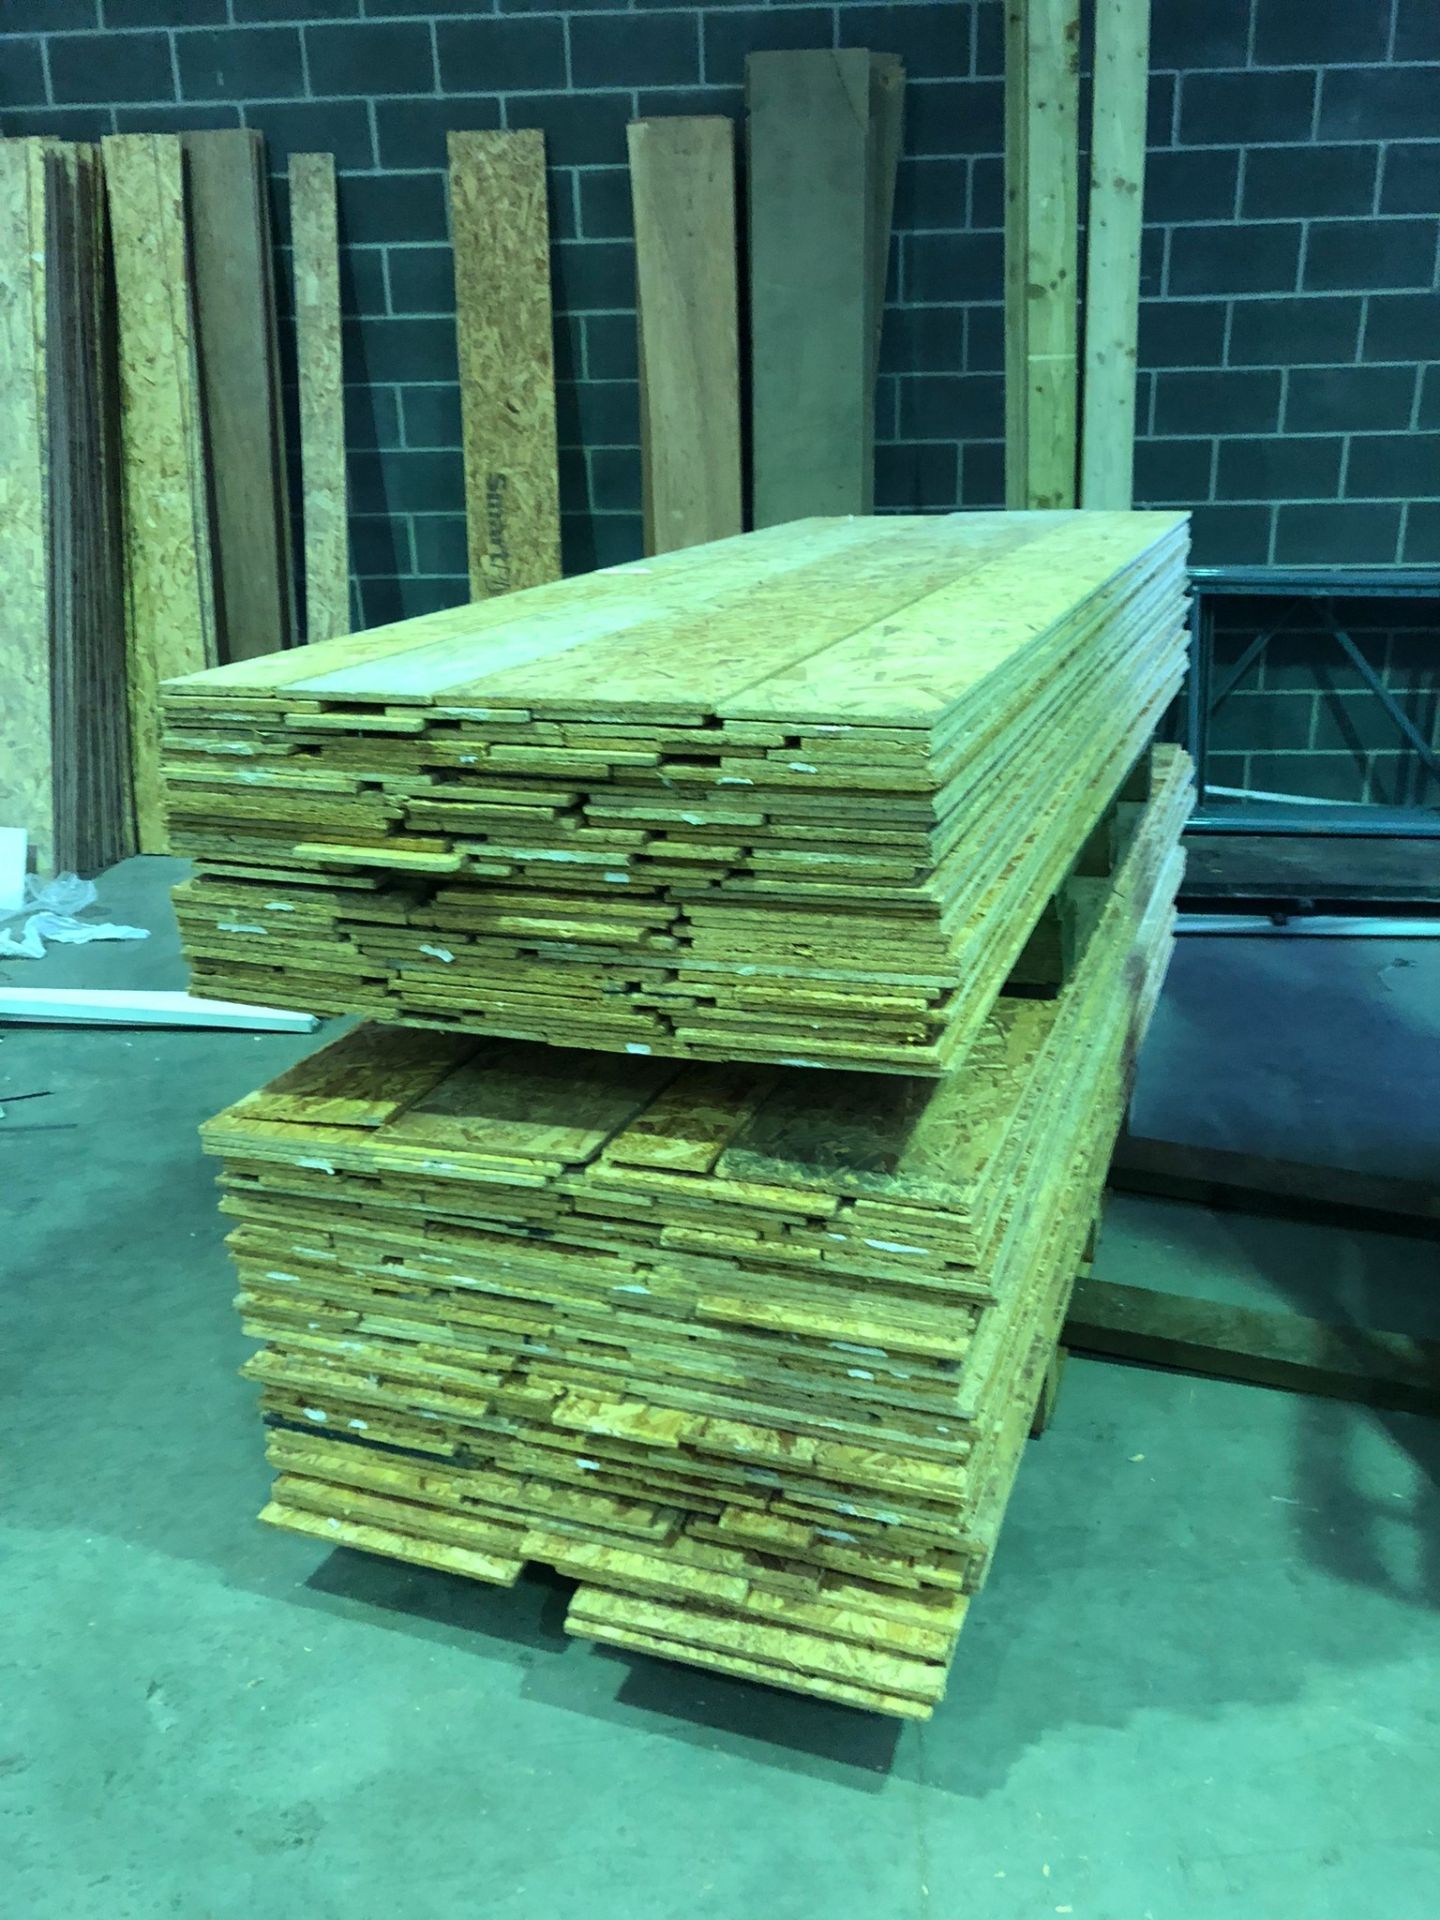 2 PALLETS OF 12MM OSB BOARD PLYWOOD RIPS BETWEEN 6INCH - 20INCH - 96 FULL SHEETS WORTH APPROX